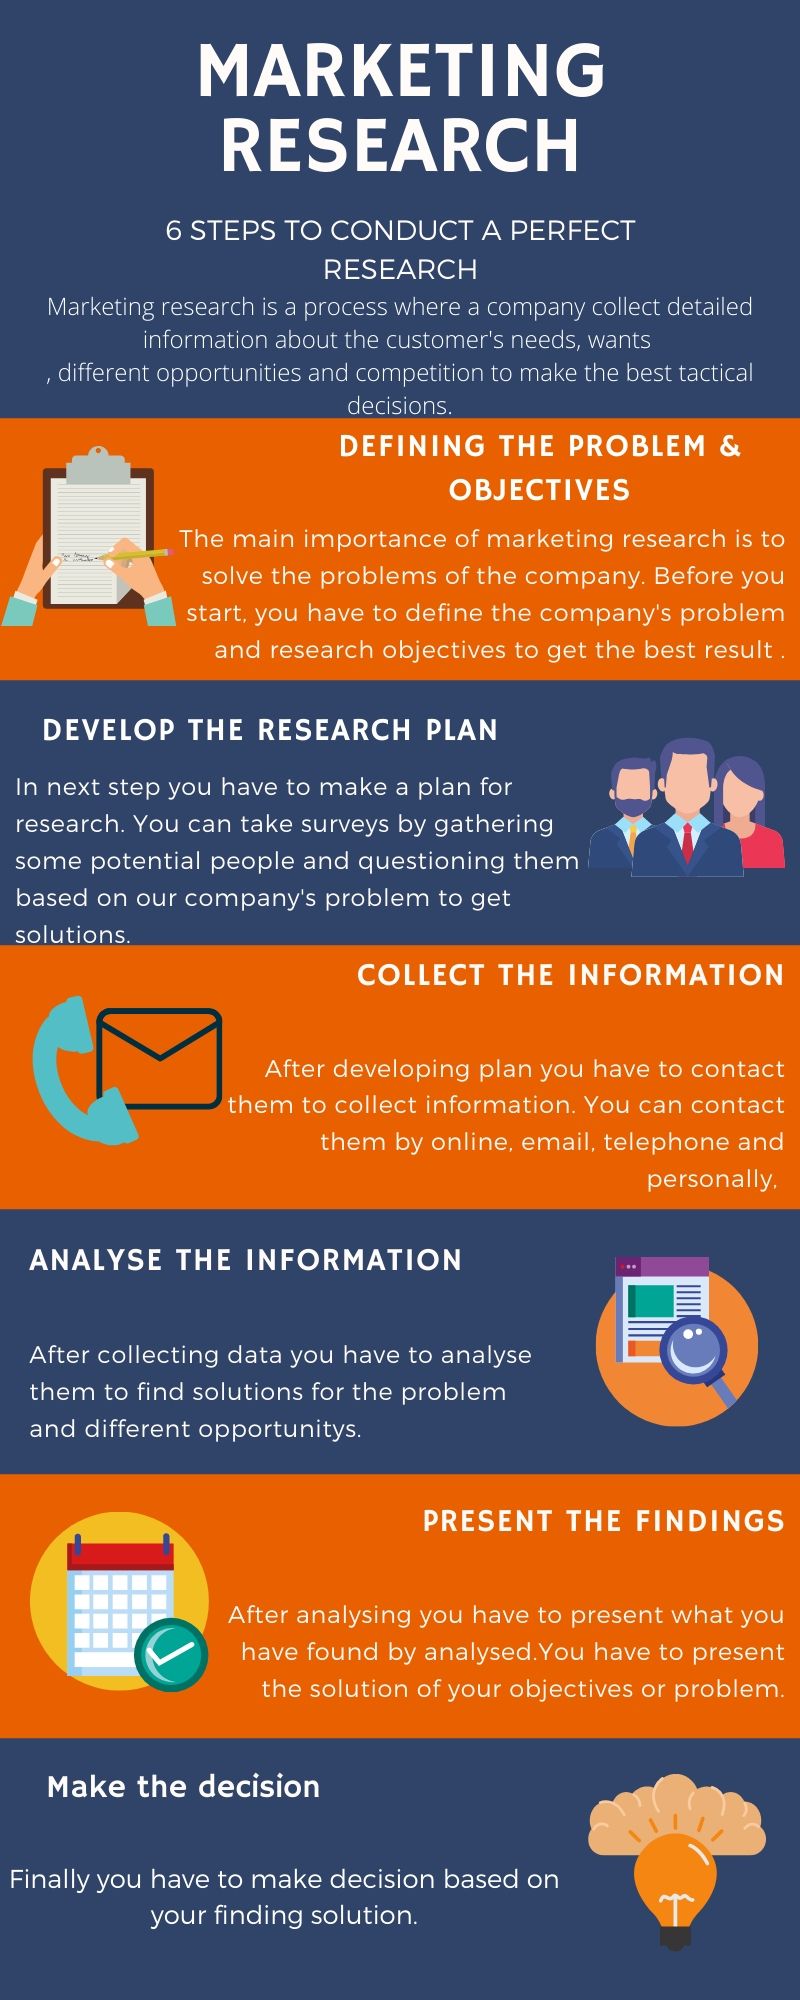 Marketing research infographic.